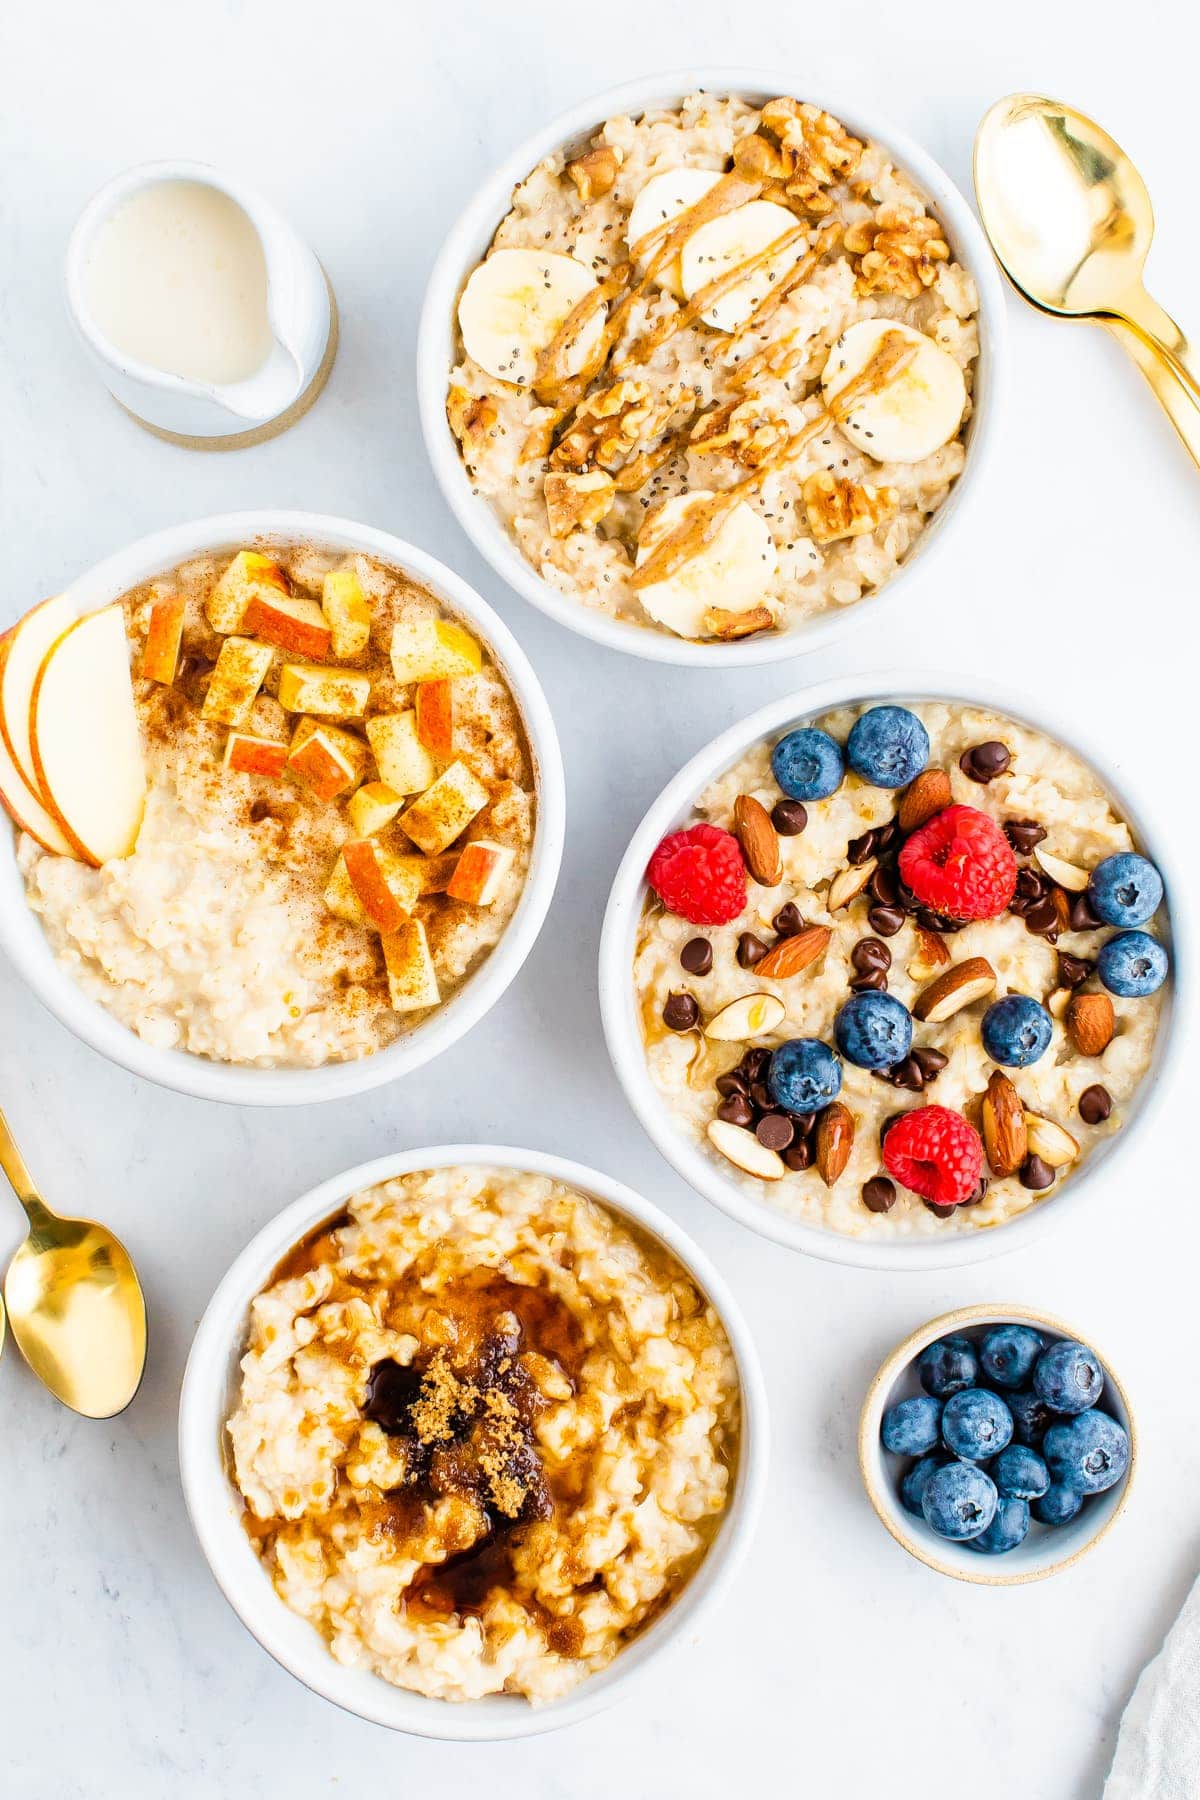 What to Put in Oatmeal: Taste, Health, Weight Loss, and More